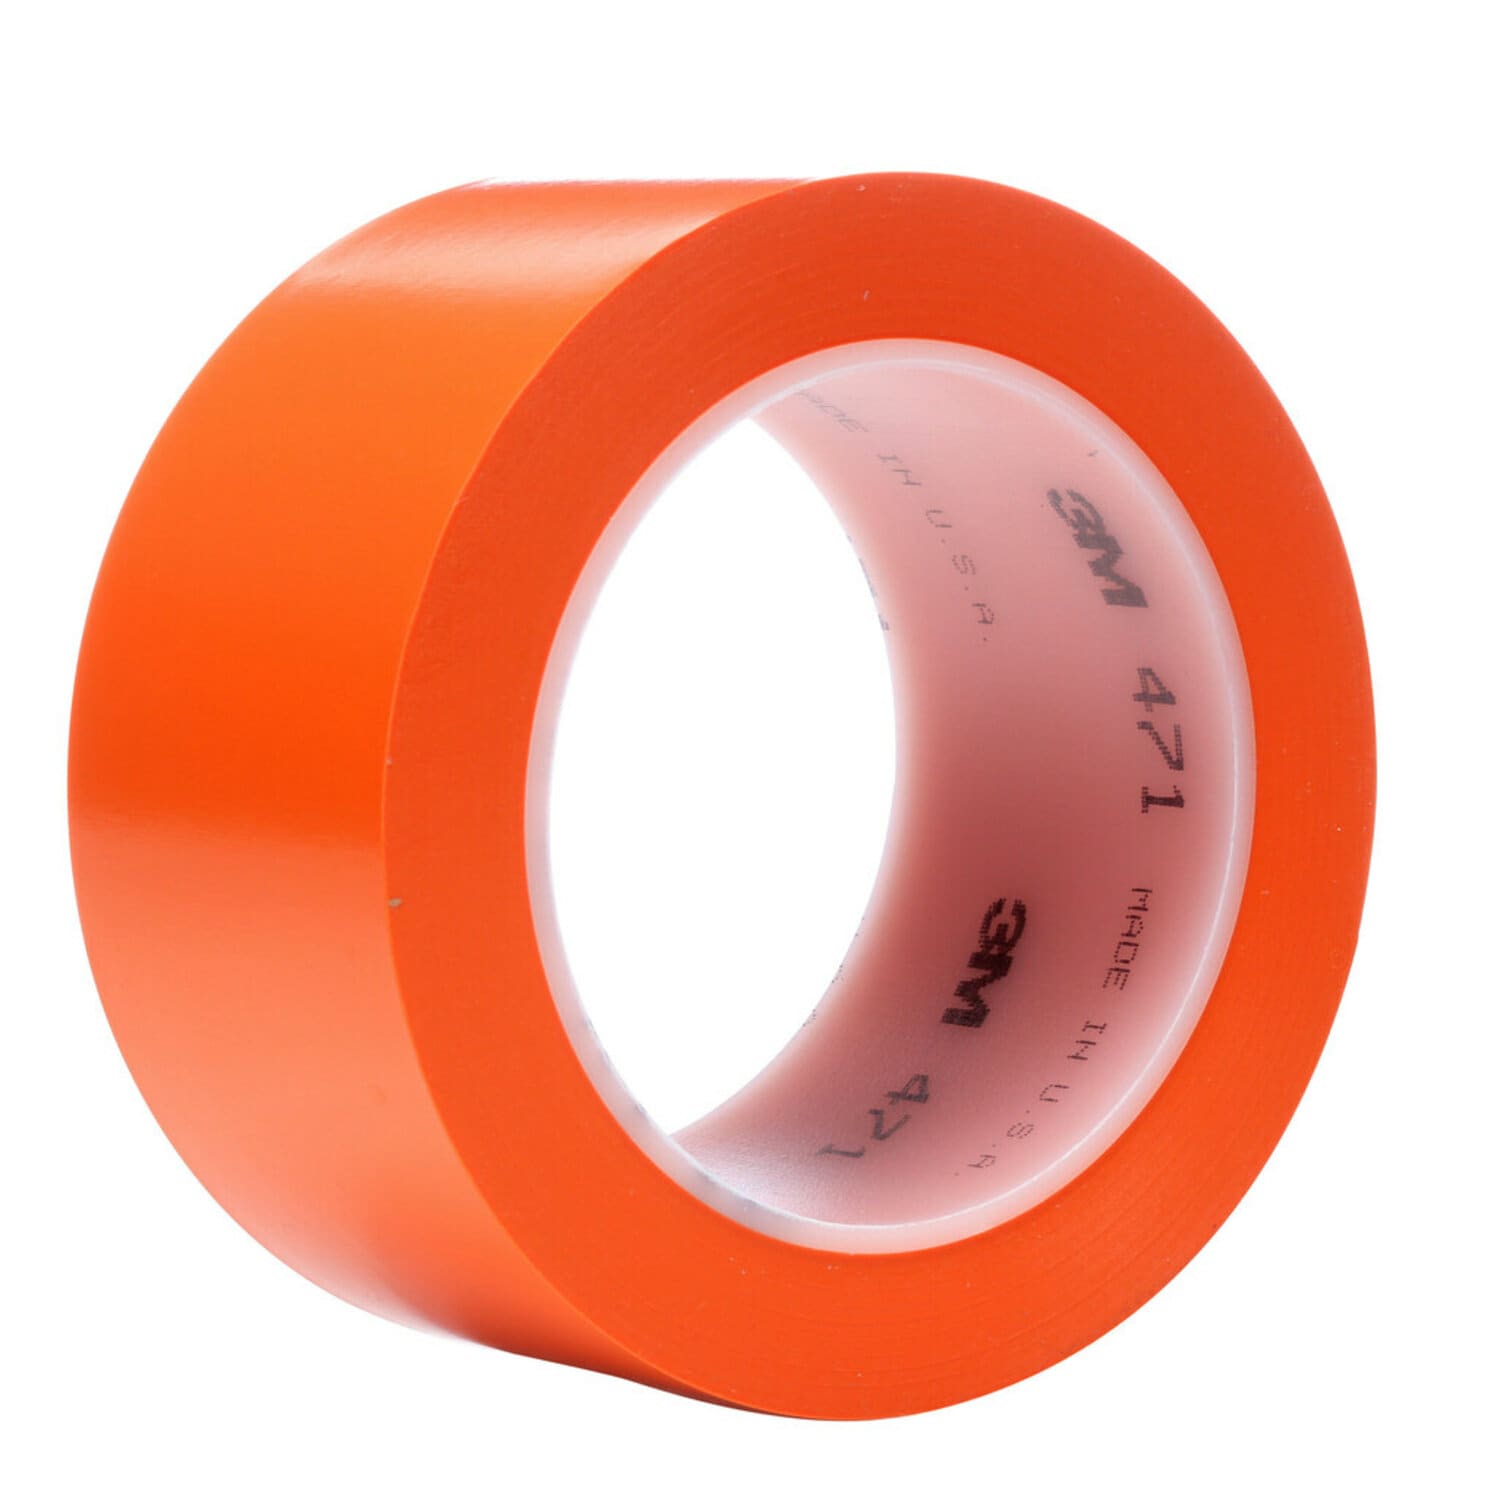 7100049358 - 3M Vinyl Tape 471, Orange, 1/2 in x 36 yd, 5.2 mil, 72 rolls per case,
Individually Wrapped Conveniently Packaged